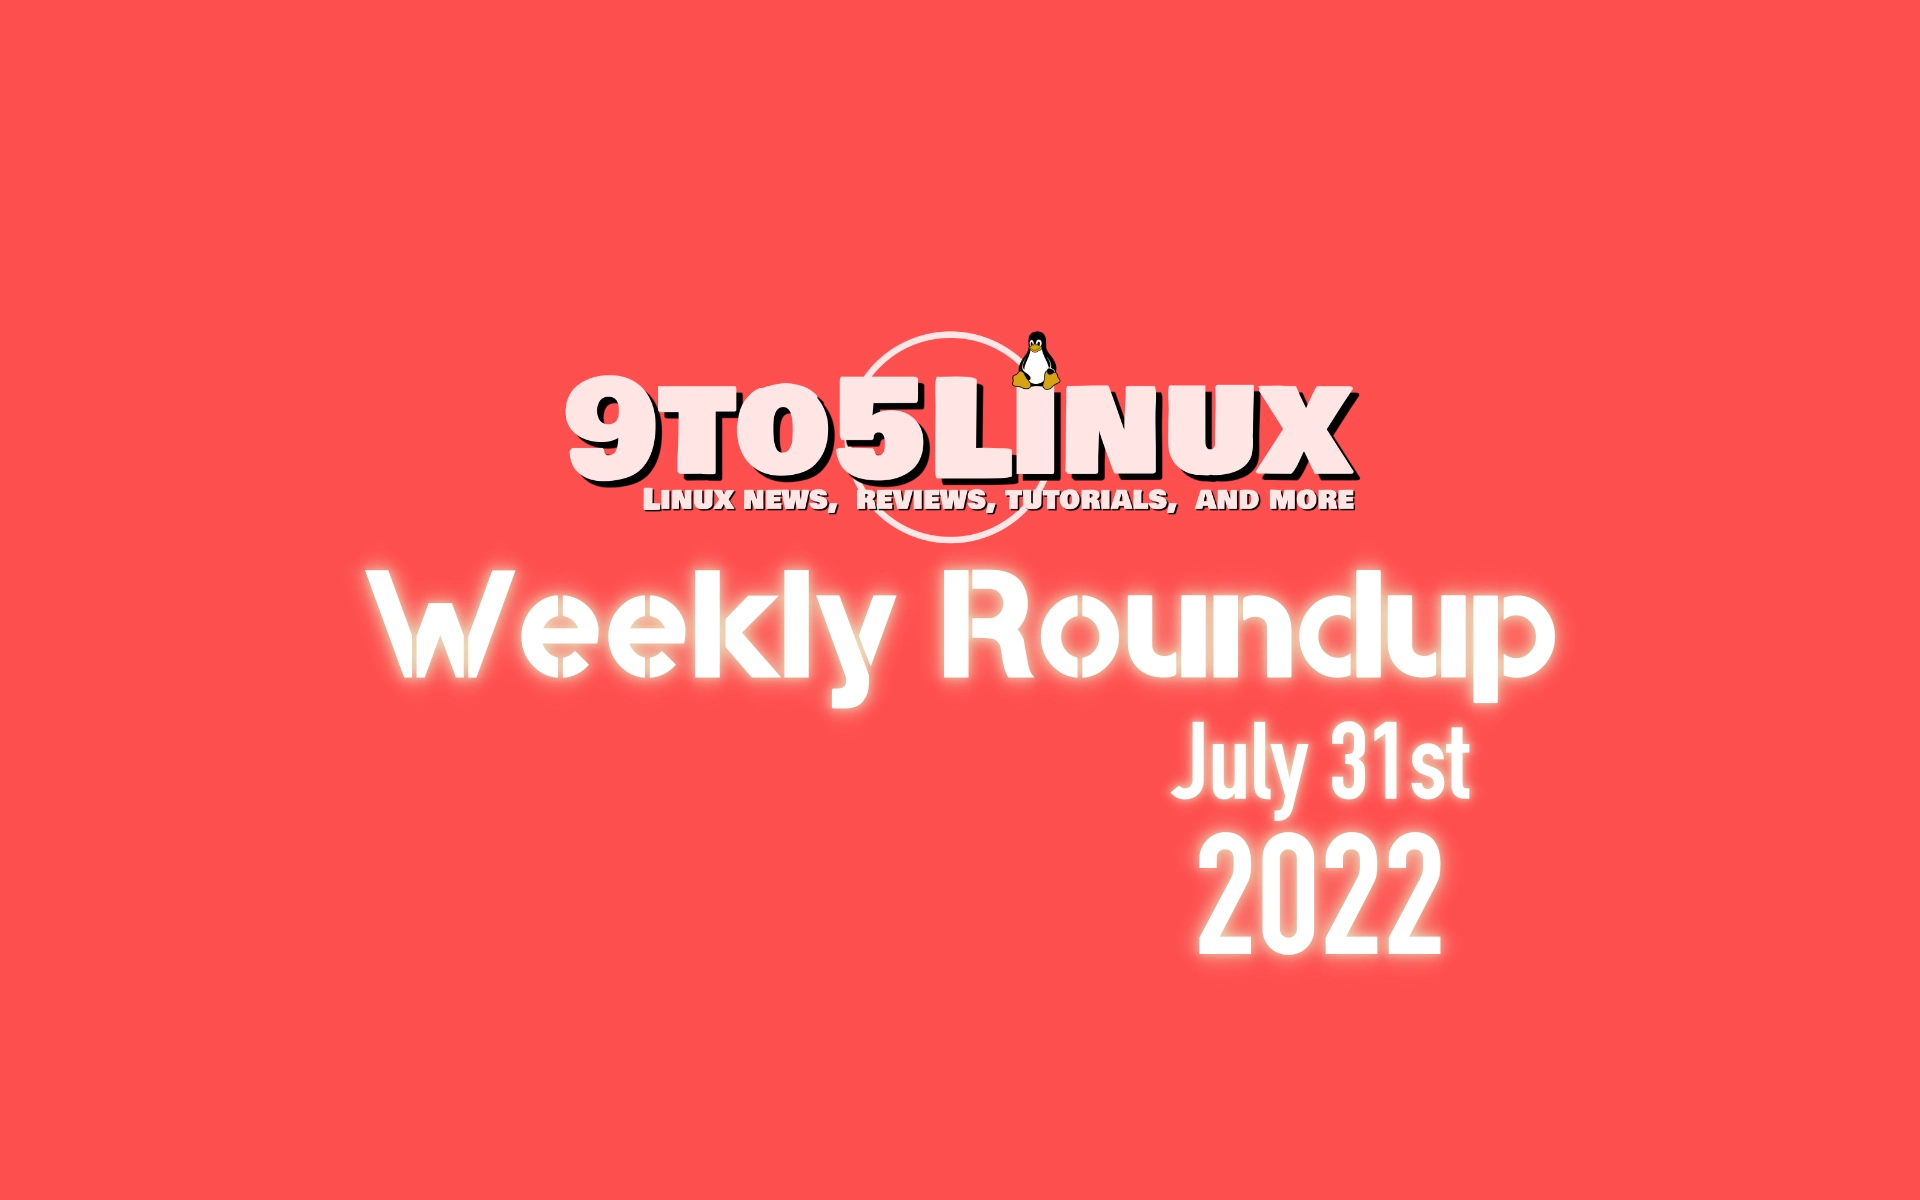 9to5Linux Weekly Roundup: July 31st, 2022